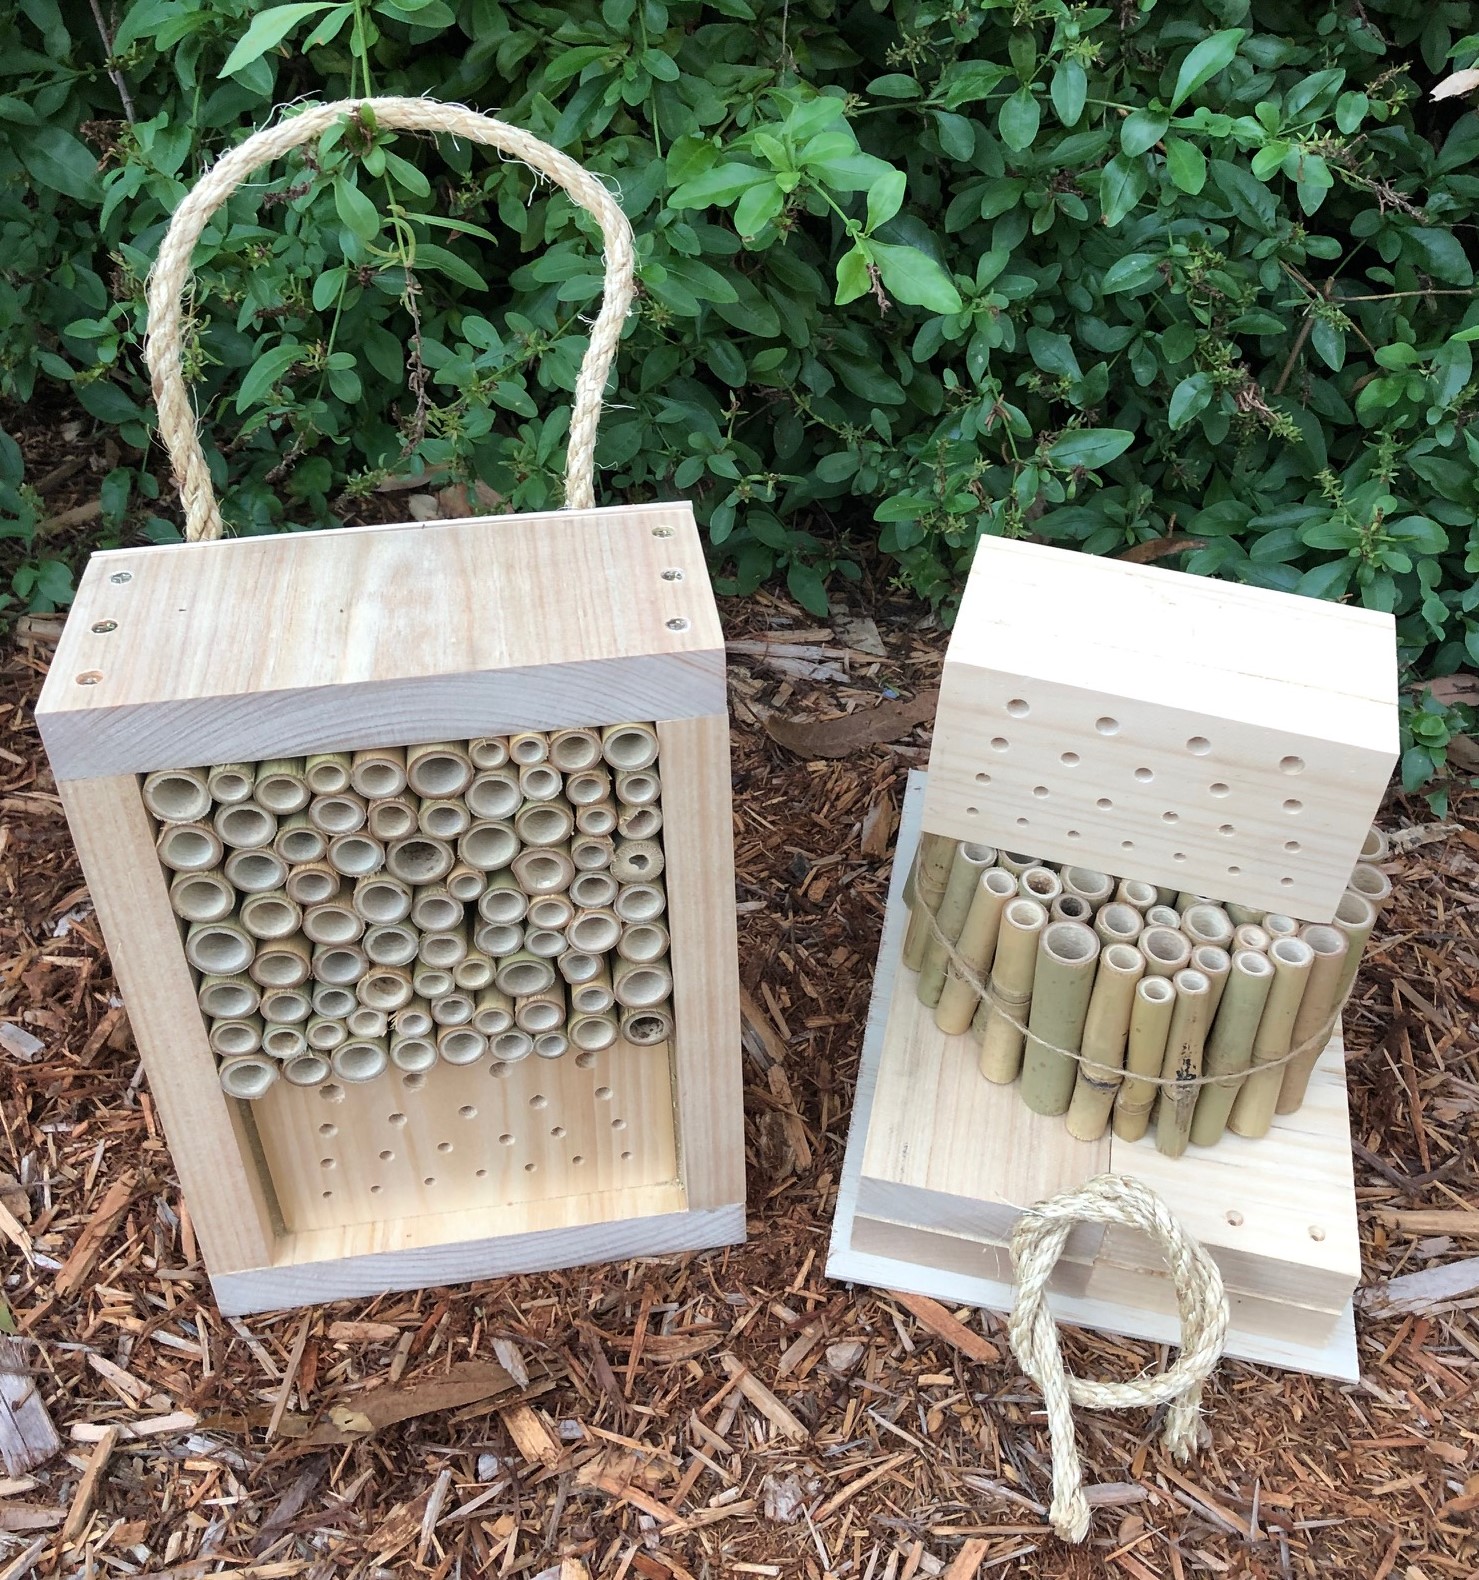 Diy Solitary Native Bee Hotel Australian Ladybird And Insect House Mixed Large Diy Kit Abeec Hives Australian Native Bee Hives